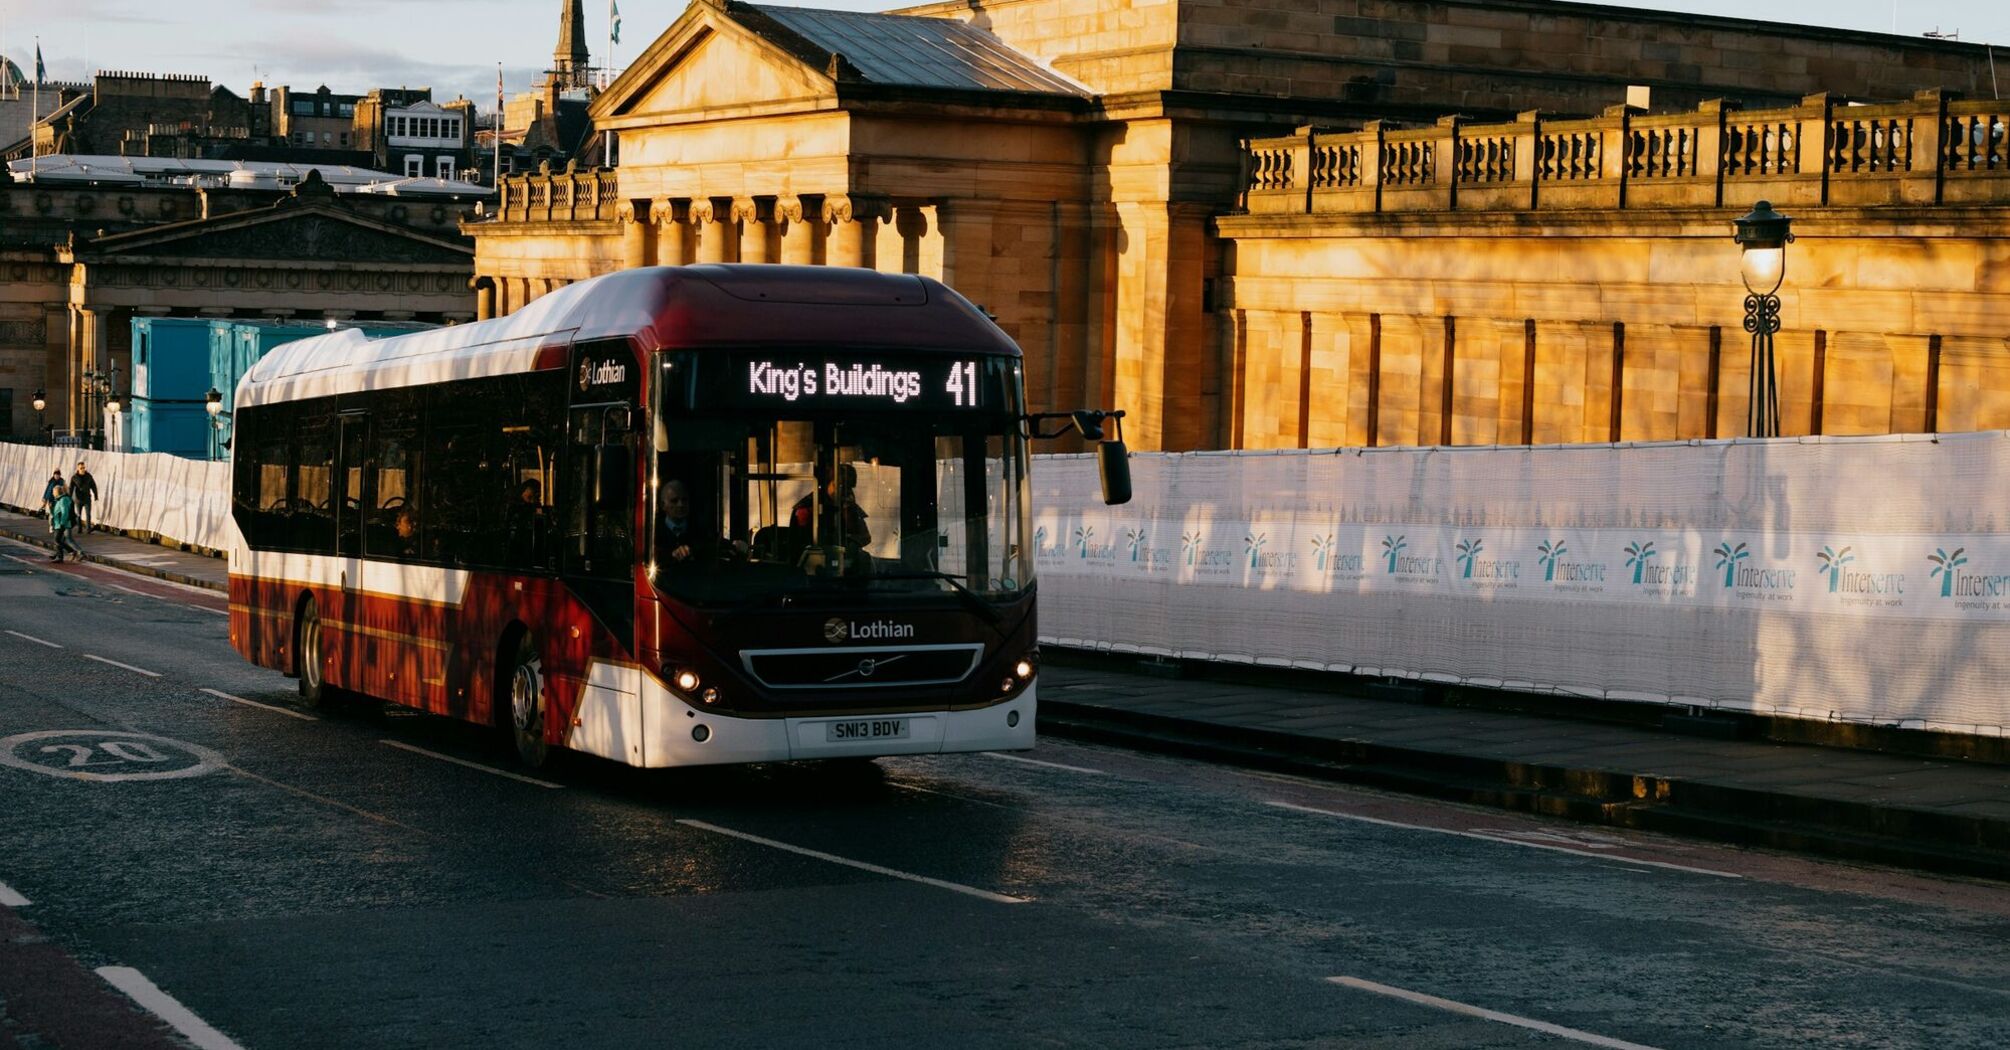 A Lothian Buses bus on route 41 passing by historical buildings in Edinburgh during early morning light